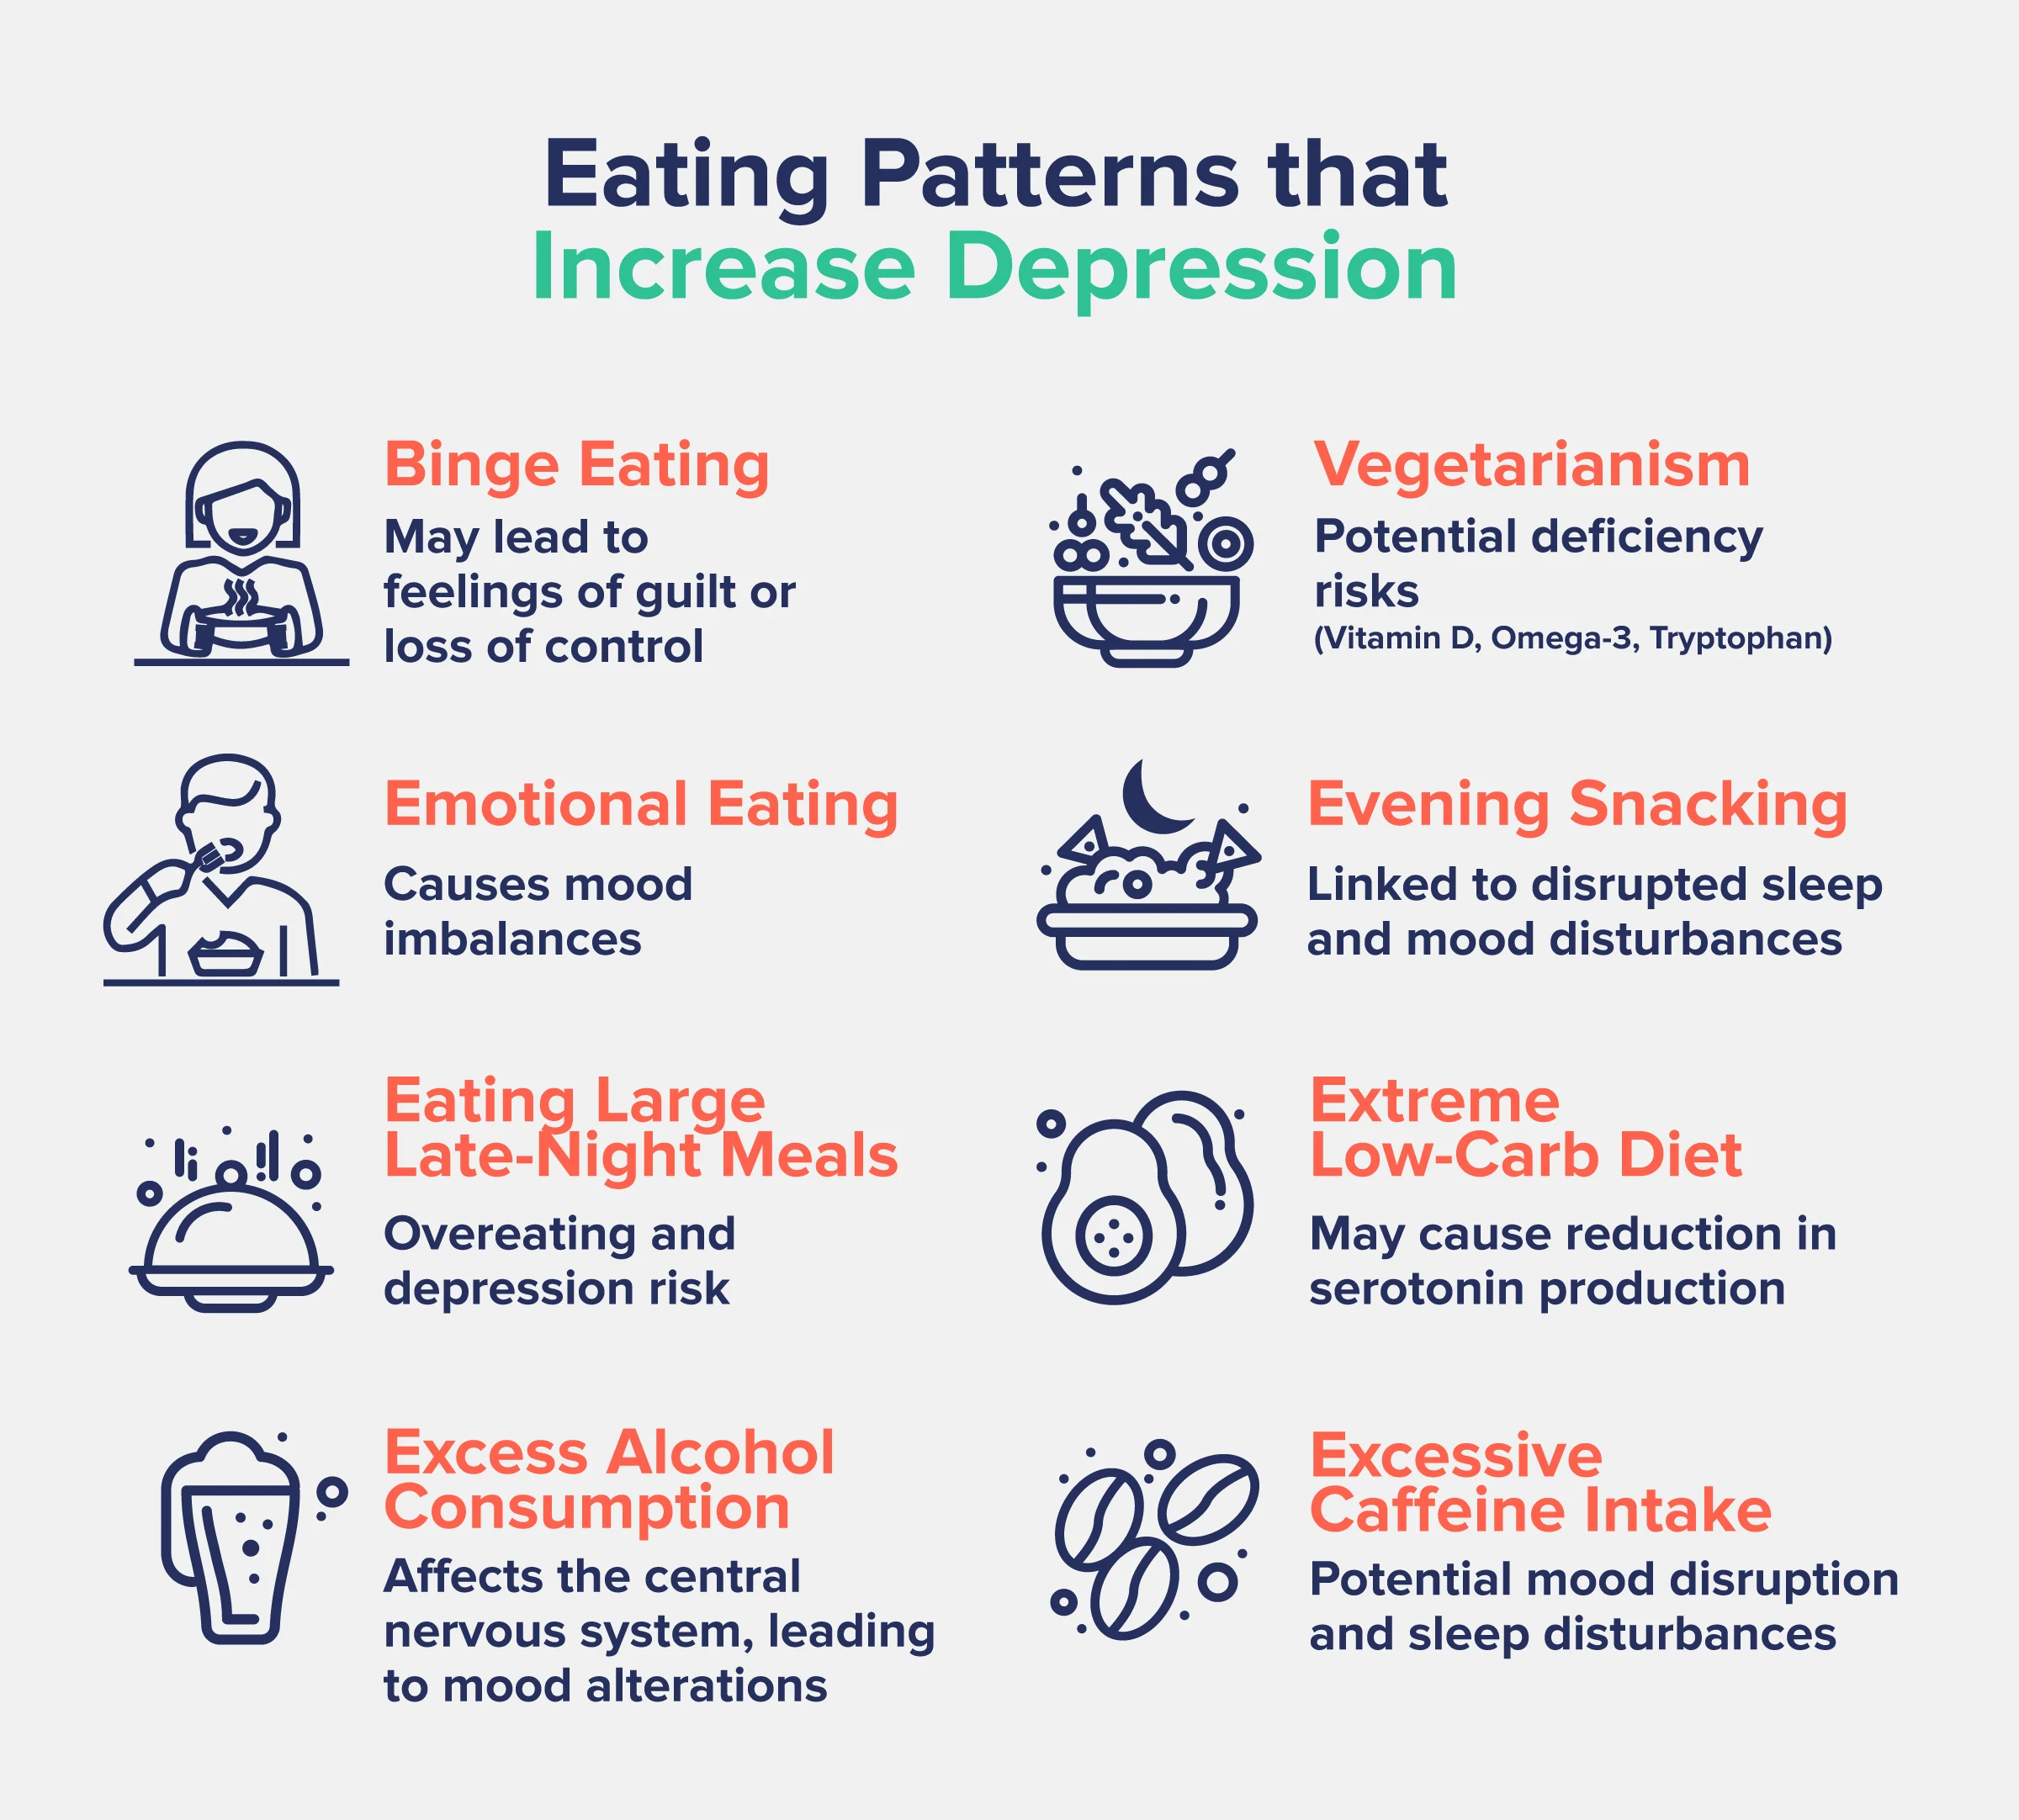 Eating Patterns that Increase DepressionBinge Eating: Increased Risk of DepressionEmotional Eating: Mood ImbalancesLarge Dinners: Overeating and Depression RiskEvening Snacking: Negative Impact on Mental HealthVegetarianism: Potential Deficiency Risks (Vitamin D, Omega-3, Tryptophan)Very Low-Carb Diet: Reduced Serotonin ProductionExcess Alcohol Consumption: Depressant Effects and AnxietyExcessive Caffeine Intake: Potential Mood Disruption and Sleep Disturbances